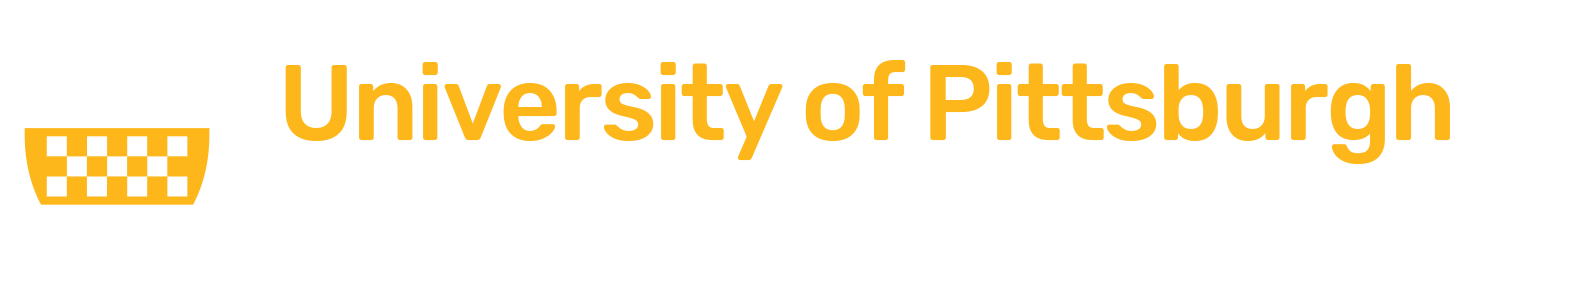 University of Pittsburgh Law Review Journal Online